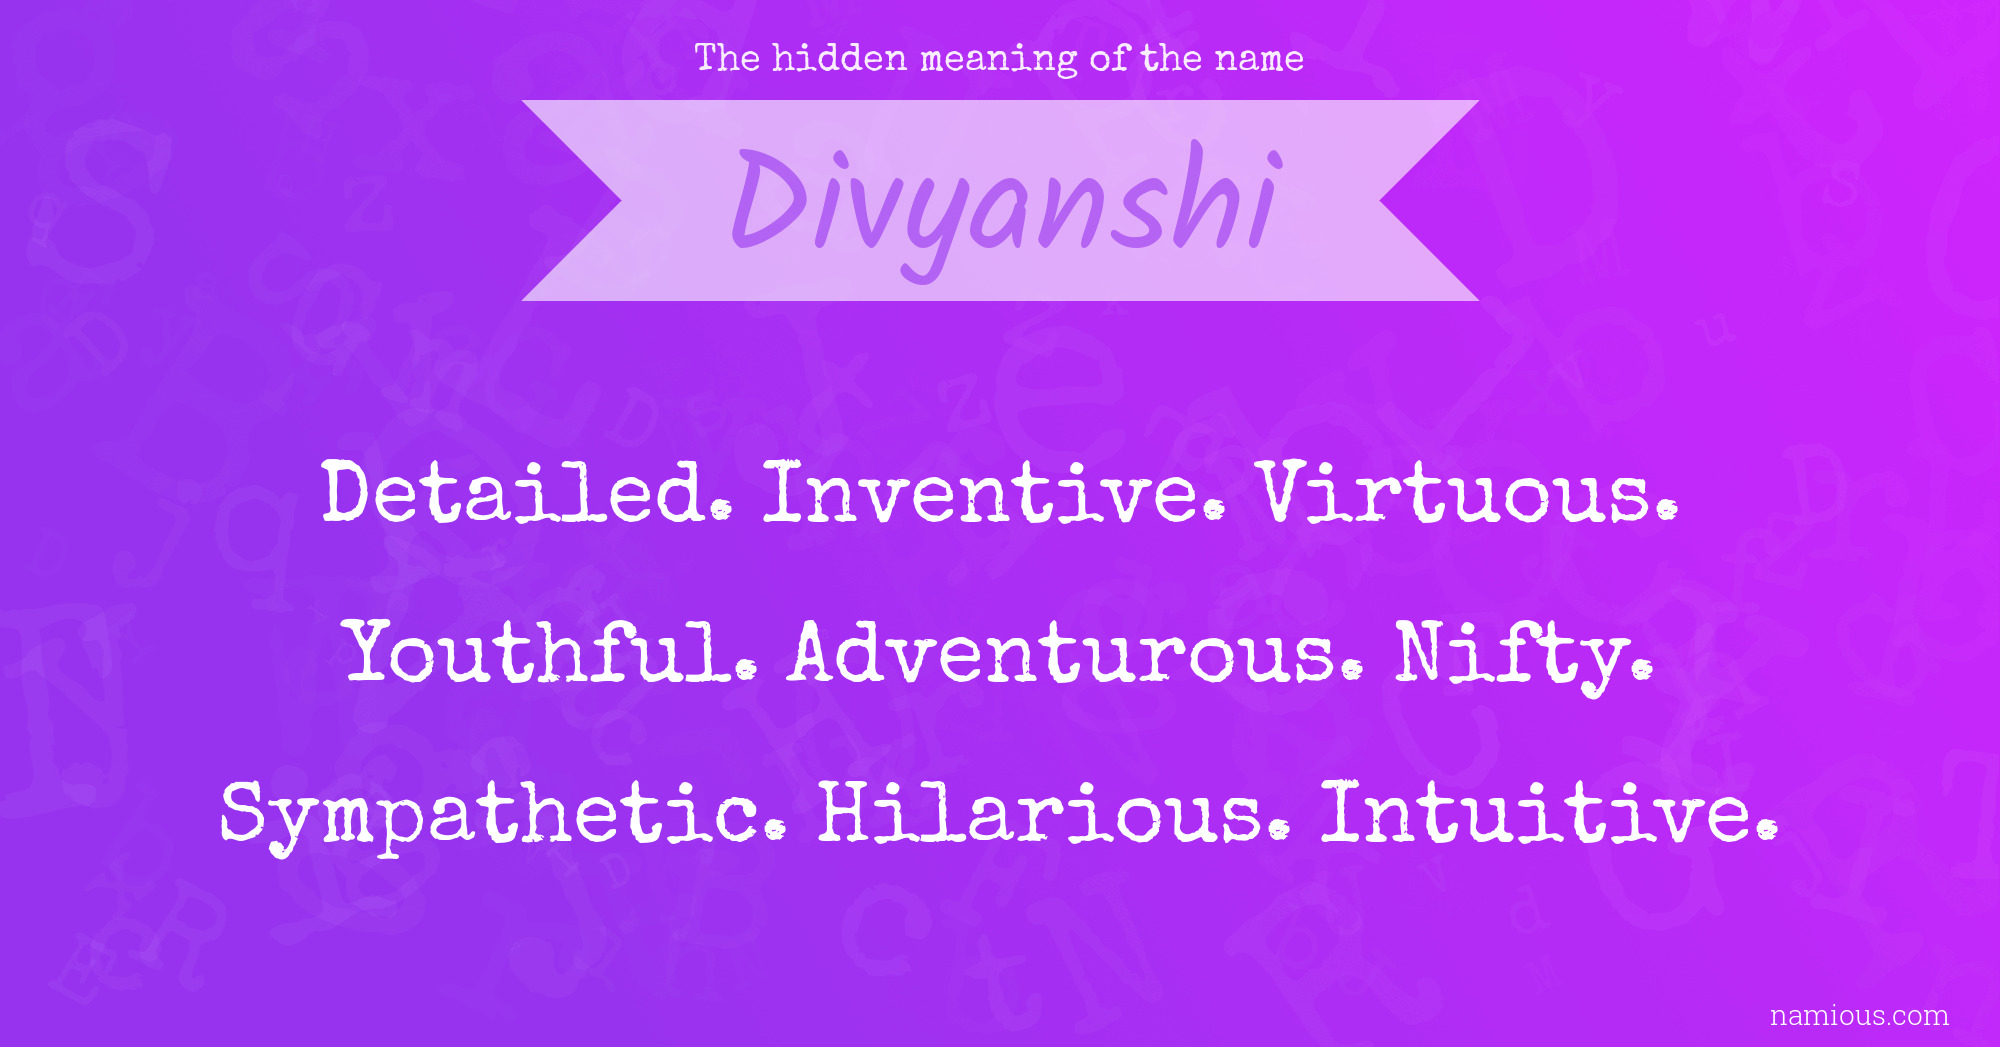 The hidden meaning of the name Divyanshi